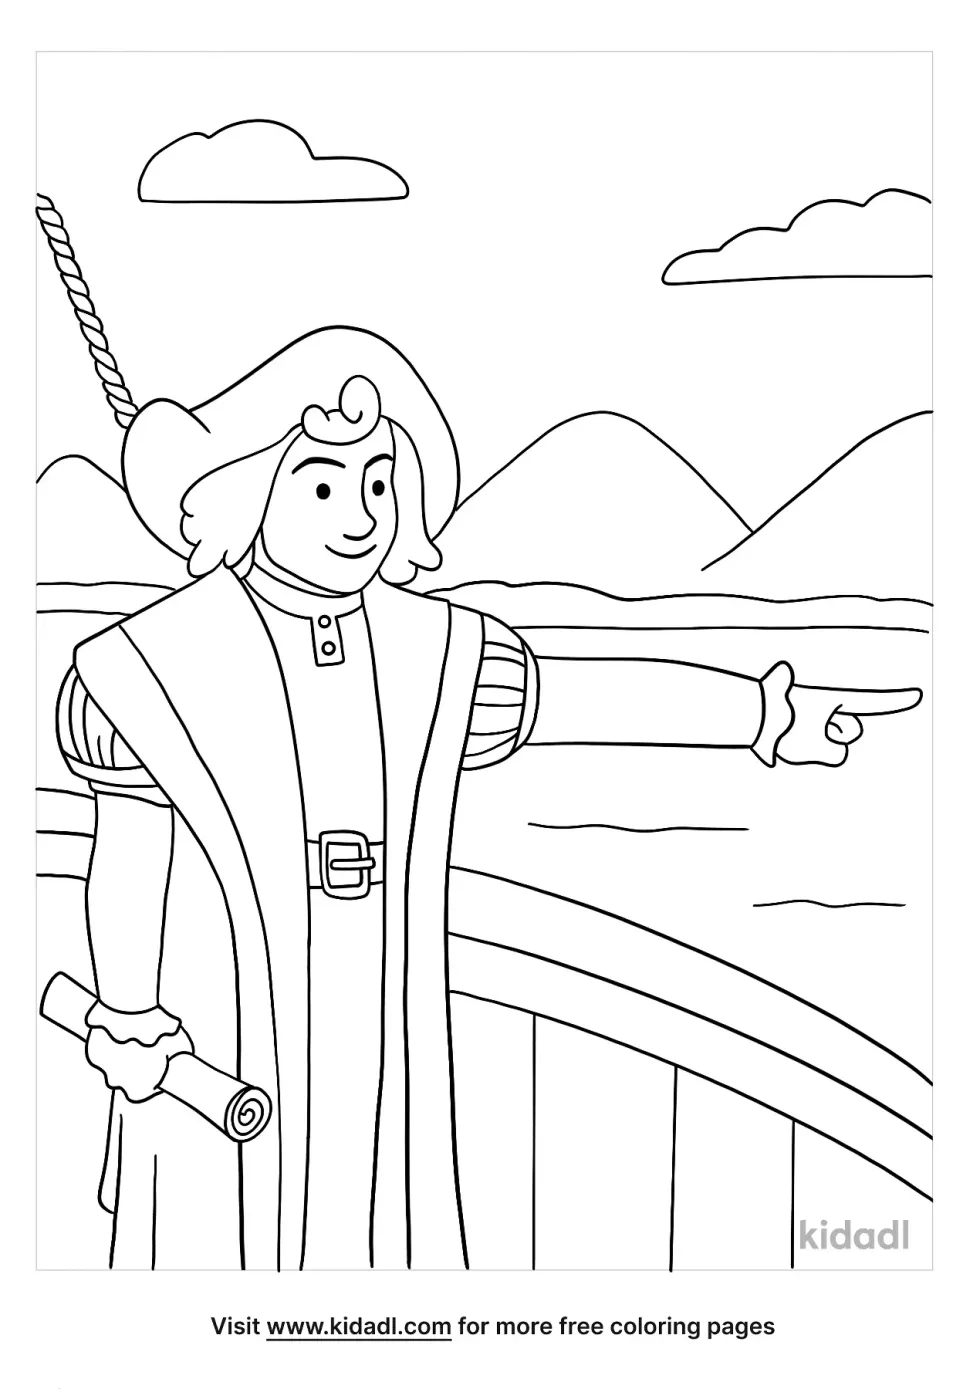 Early Explorers Coloring Page